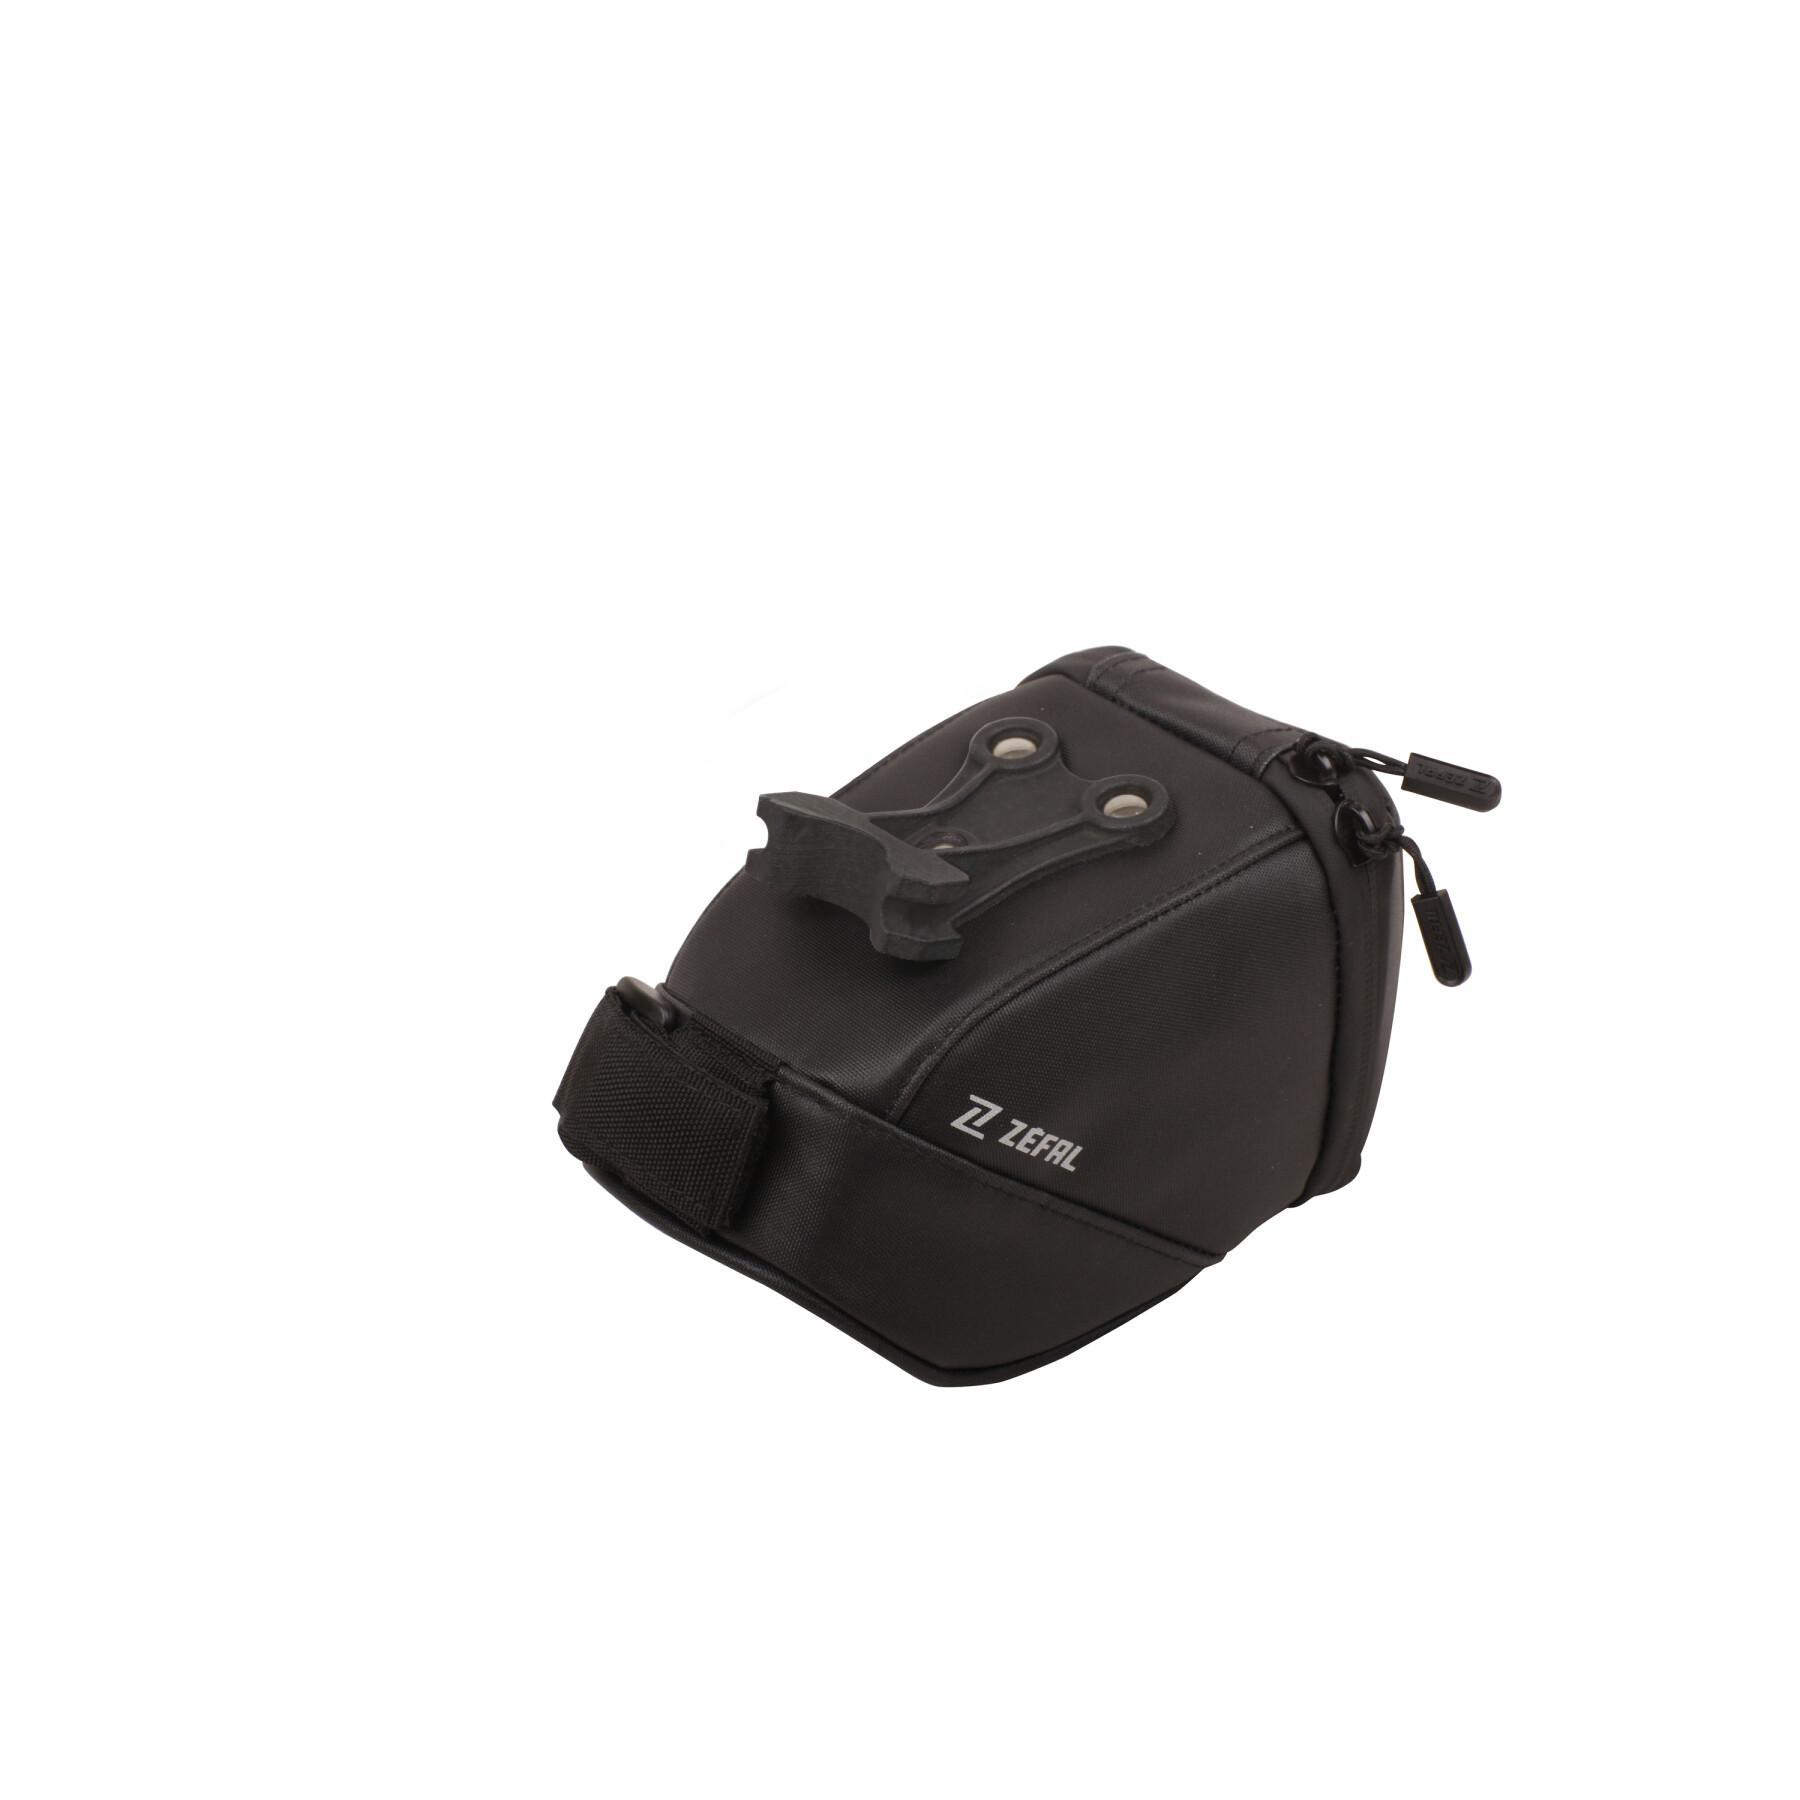 Seatpost bag Zefal Iron pack 2 m-tf